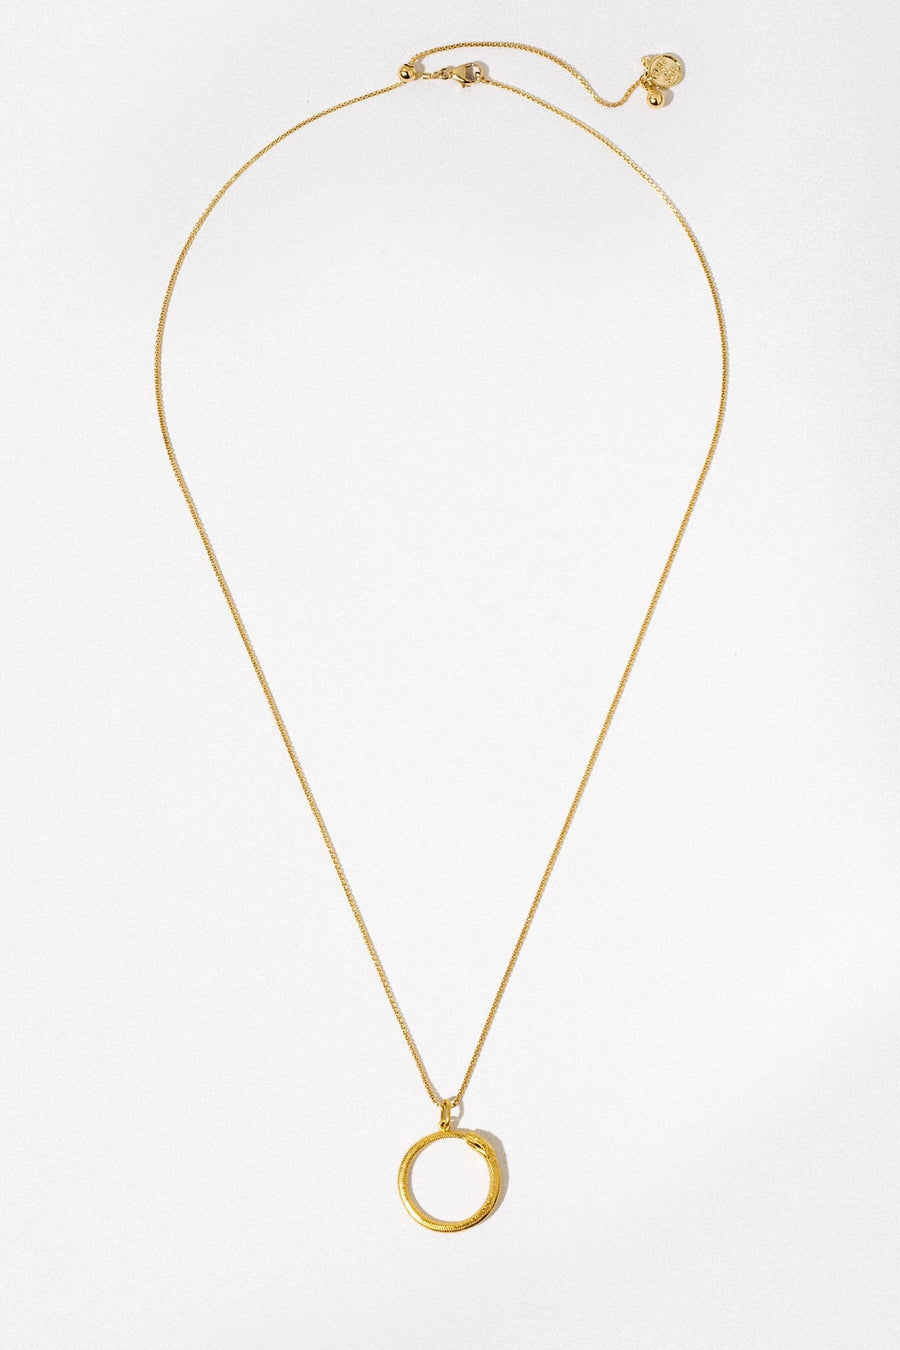 CGM Jewelry Gold / 22 Inches Karma Necklace